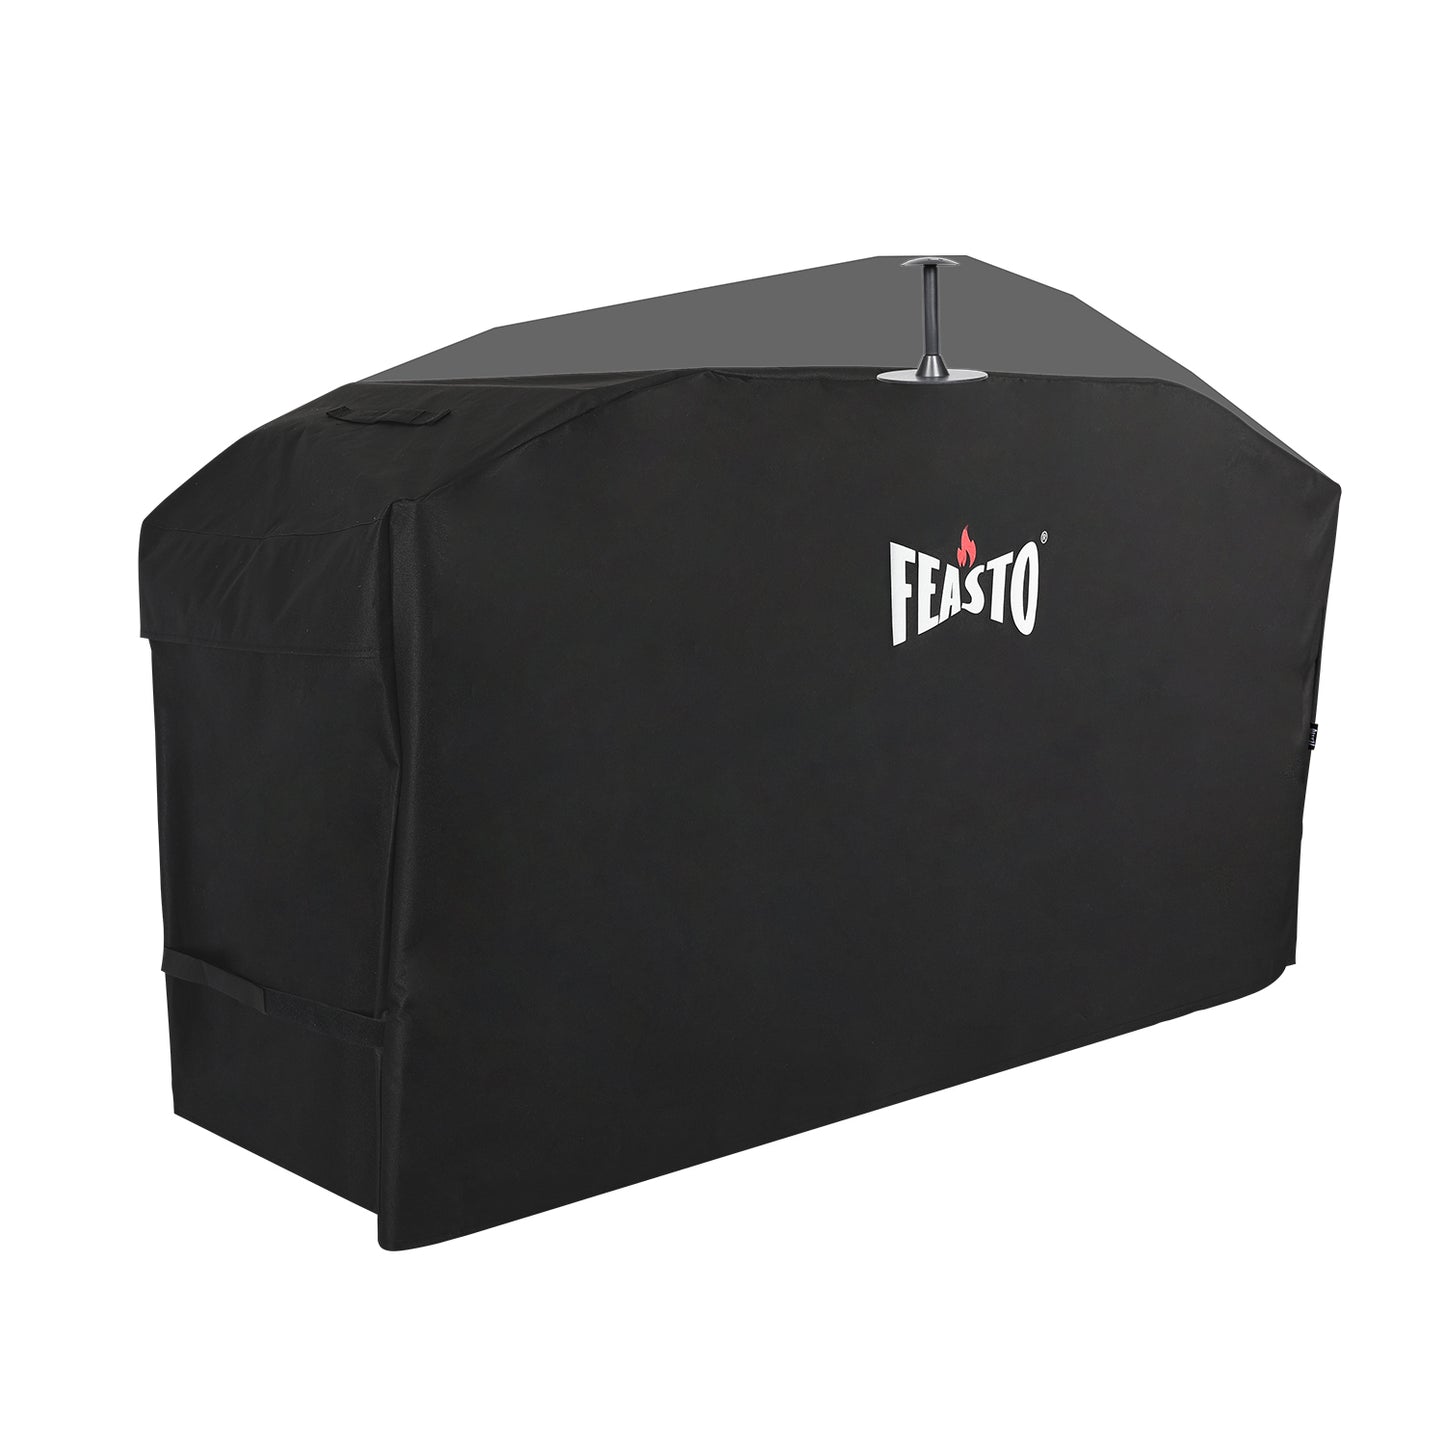 FEASTO Barbecue Grill Cover 66 inches Outdoor Waterproof Large Grill and Griddle Cover  Fits Weber Char-Boil Nexgrill and more(L66.5” x W22.5” x H35”) Includes Plastic Support Pole